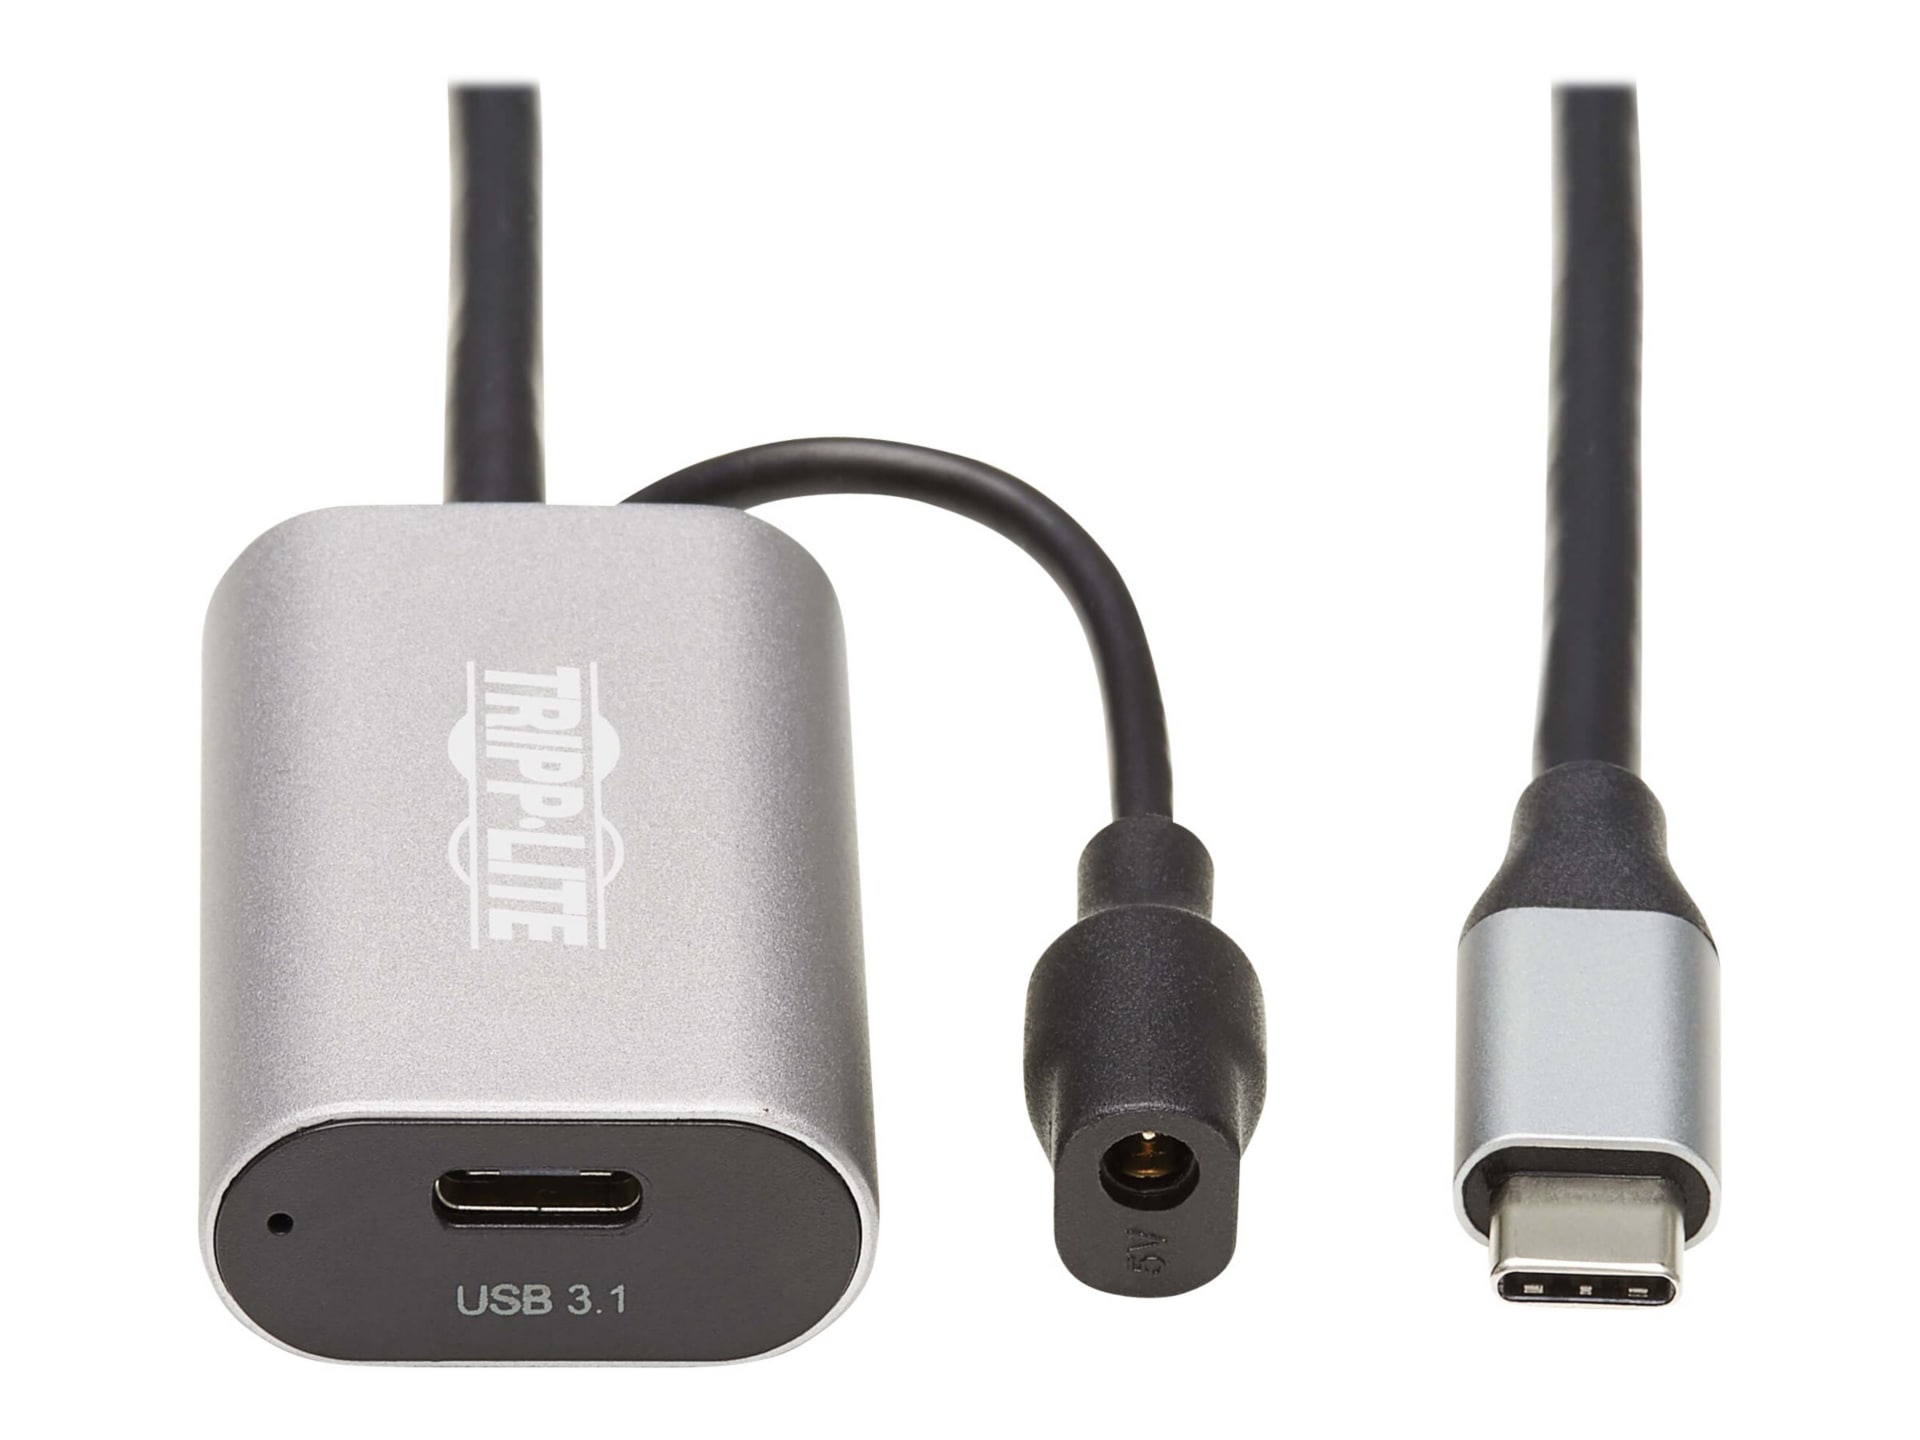 Tripp Lite USB Active Extension Cable C to USB C USB 3.1 Gen 1 M/F - USB extension cable - 24 pin USB-C to 24 - U330-05M-C2C - USB Adapters - CDW.com